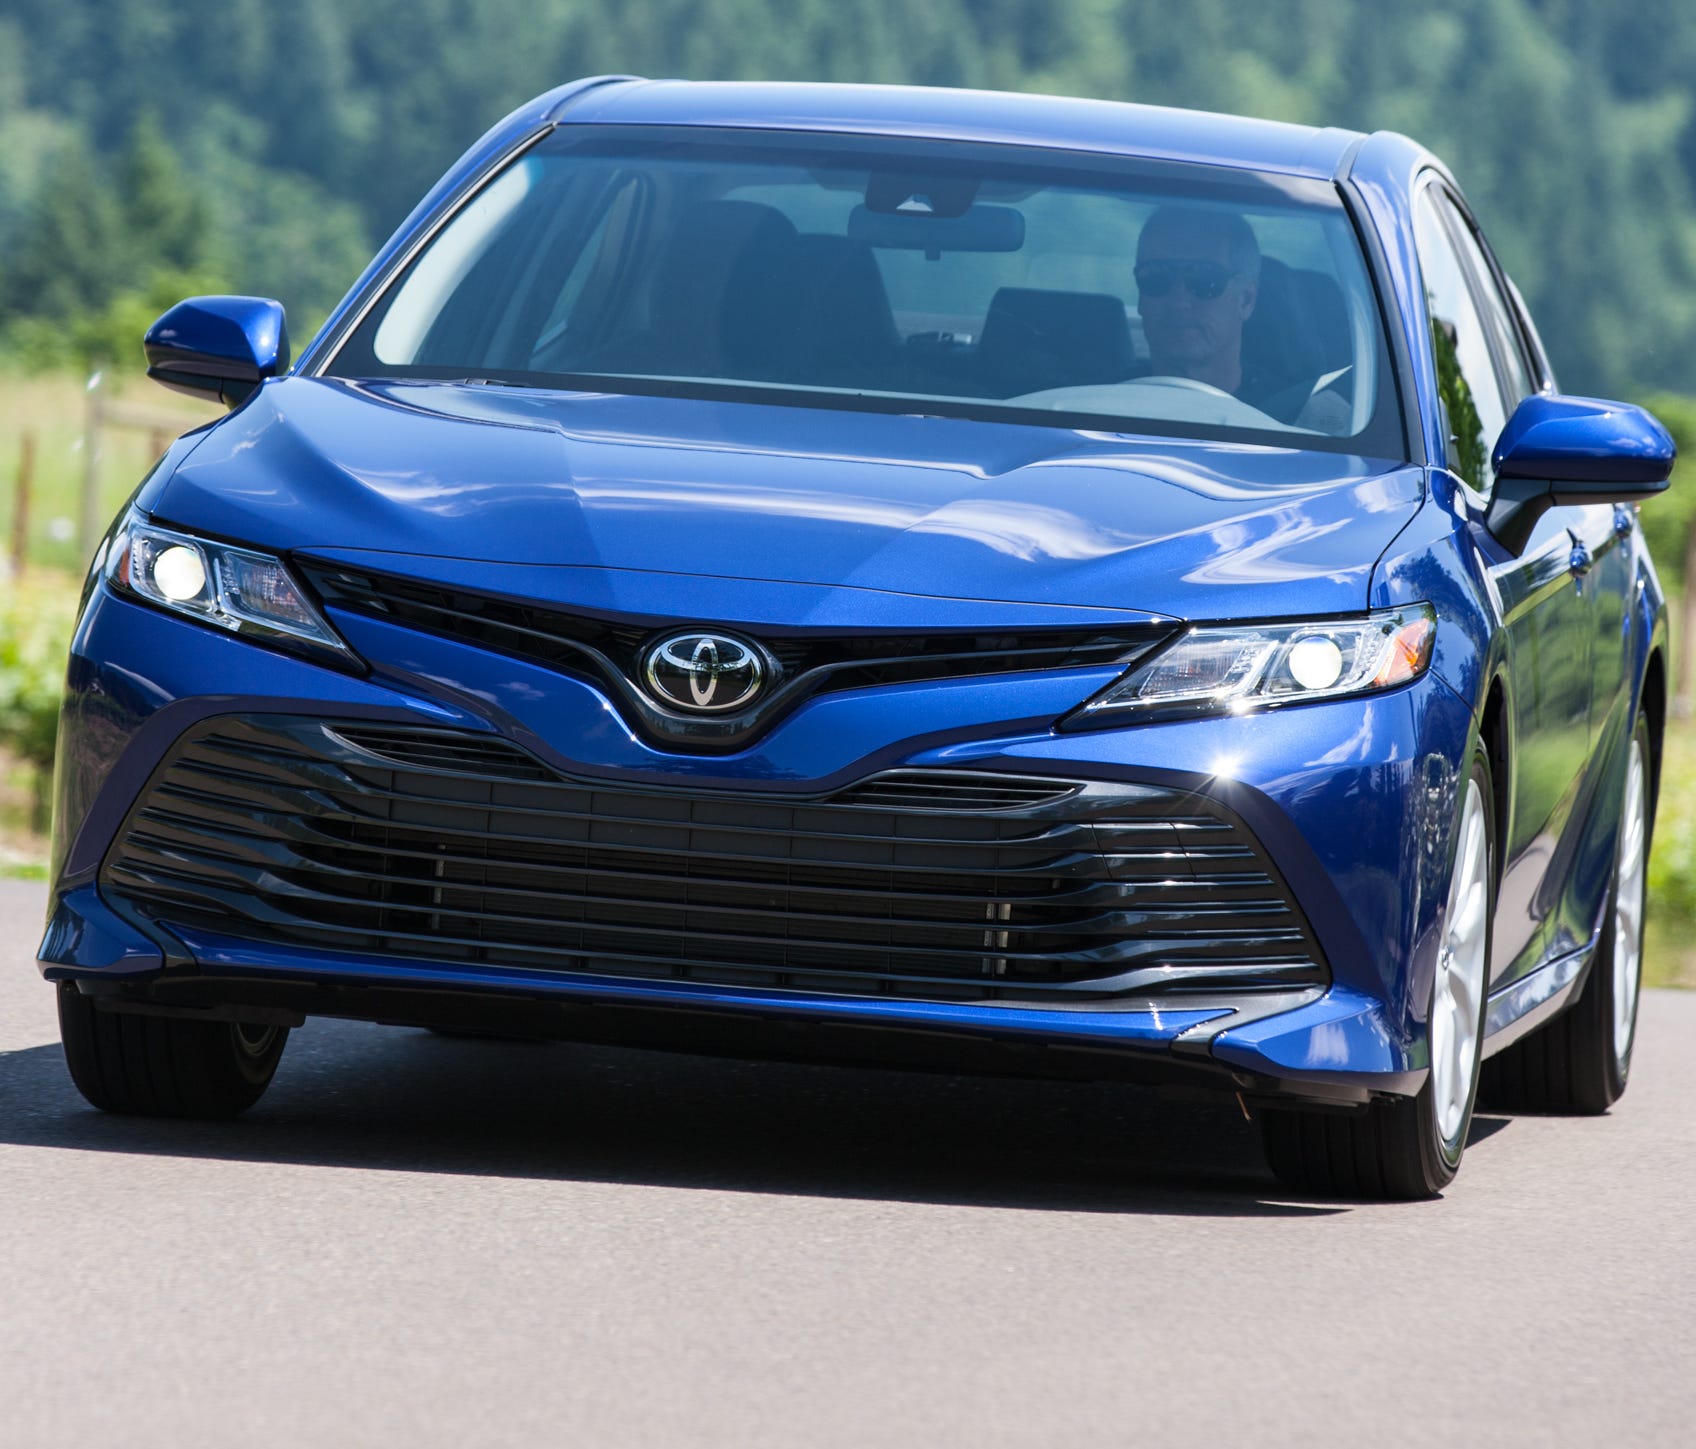 Toyota has redesigned the Camry for 2018